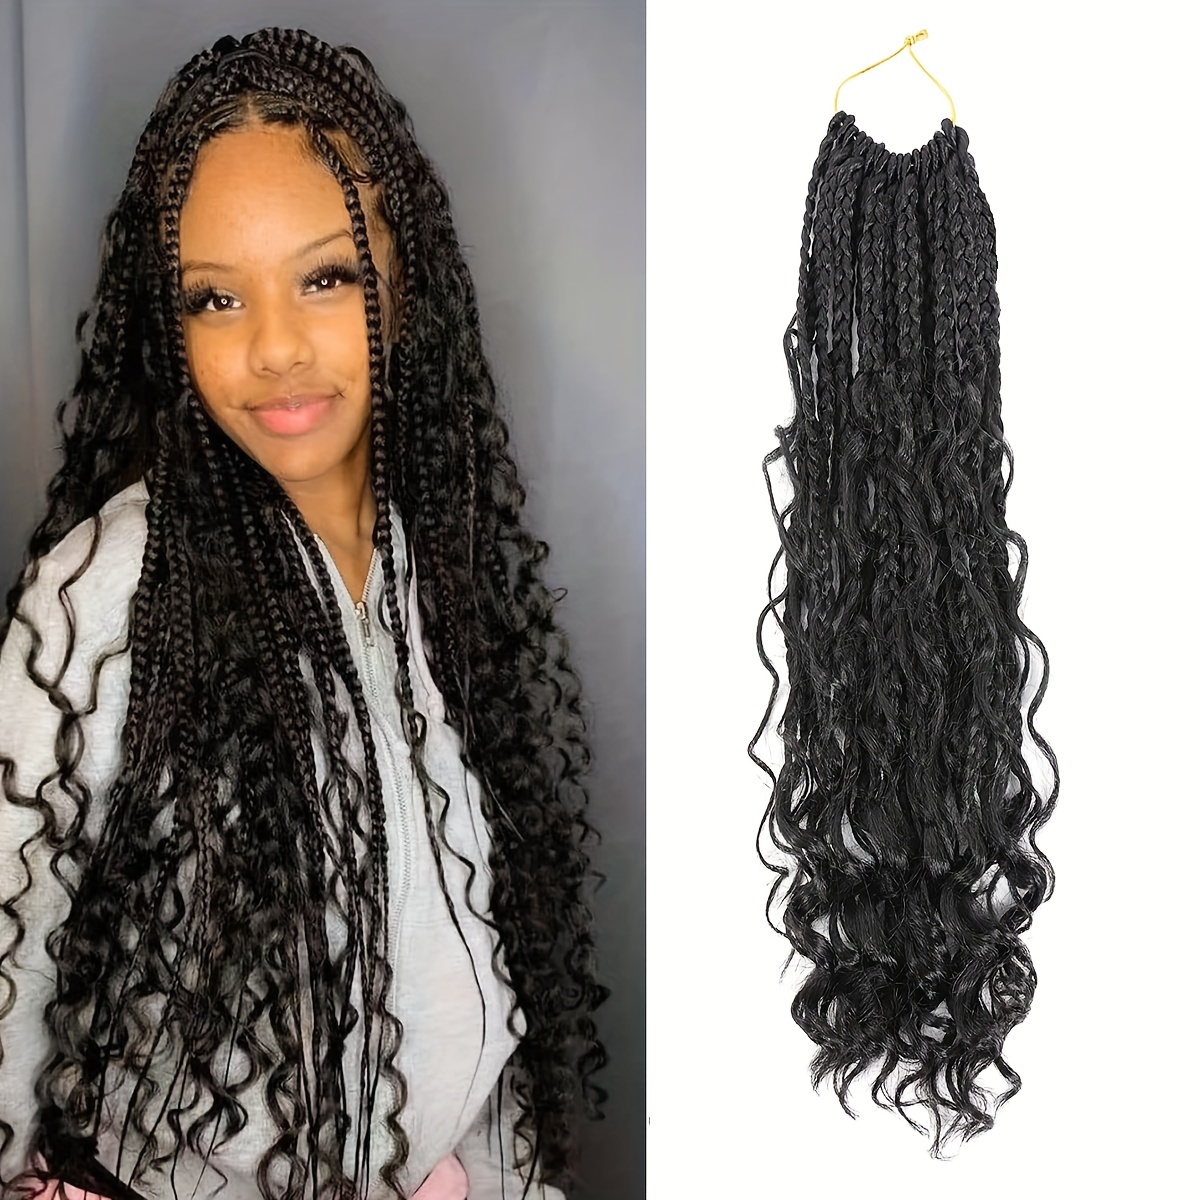 Goddess Box Braids Crochet Hair 14 Inch, 9 Packs Bohomian Box Braids  Crochet Hair for Black Women, Pre-Looped Crochet Braids with Curly Ends (14  Inch